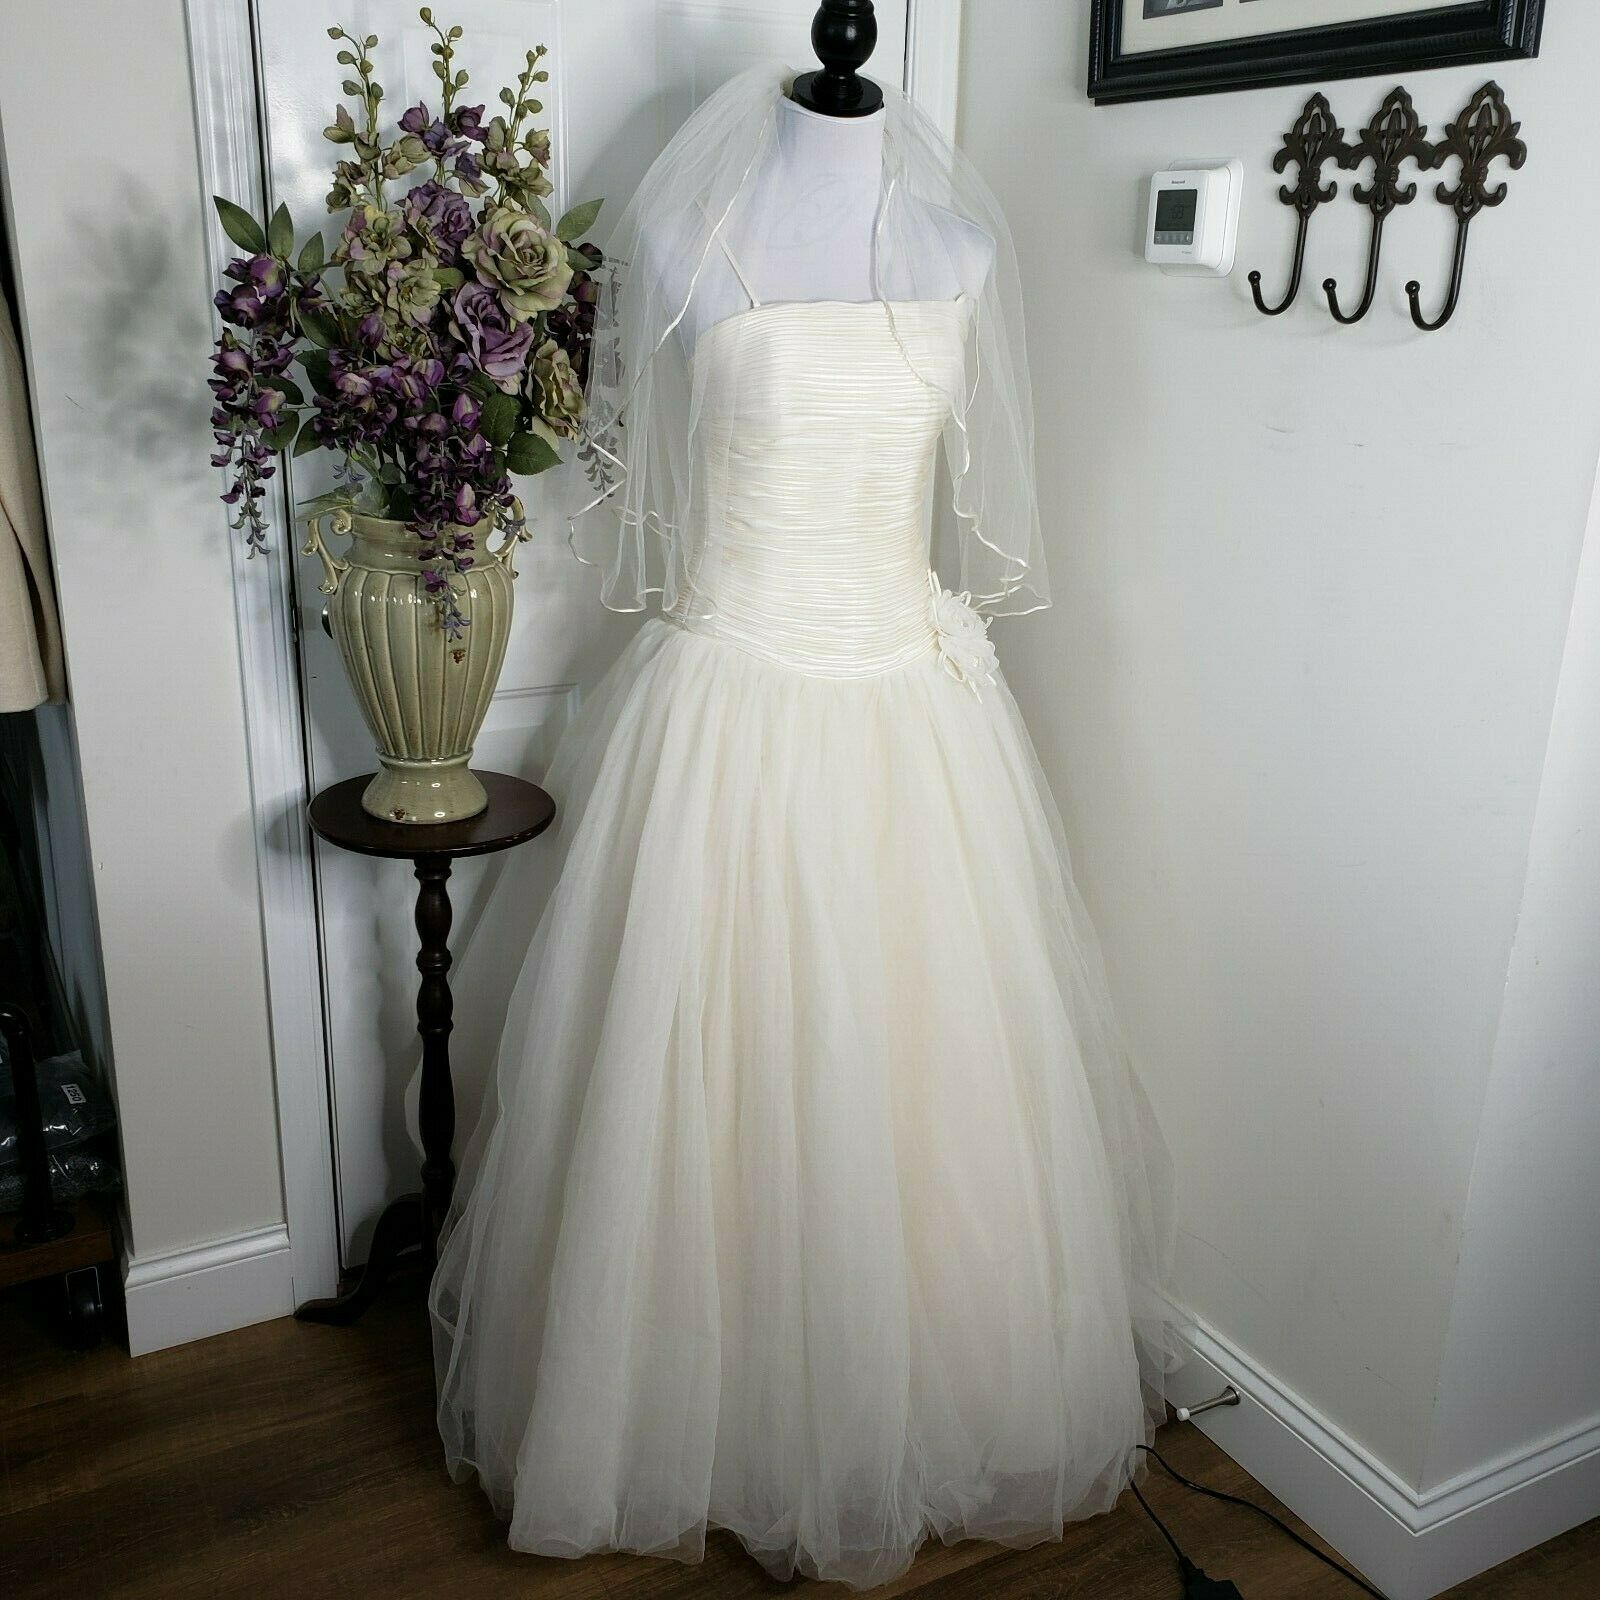 Davinci Ivory Pleated Satin & Tulle Wedding Ball Gown Size 10